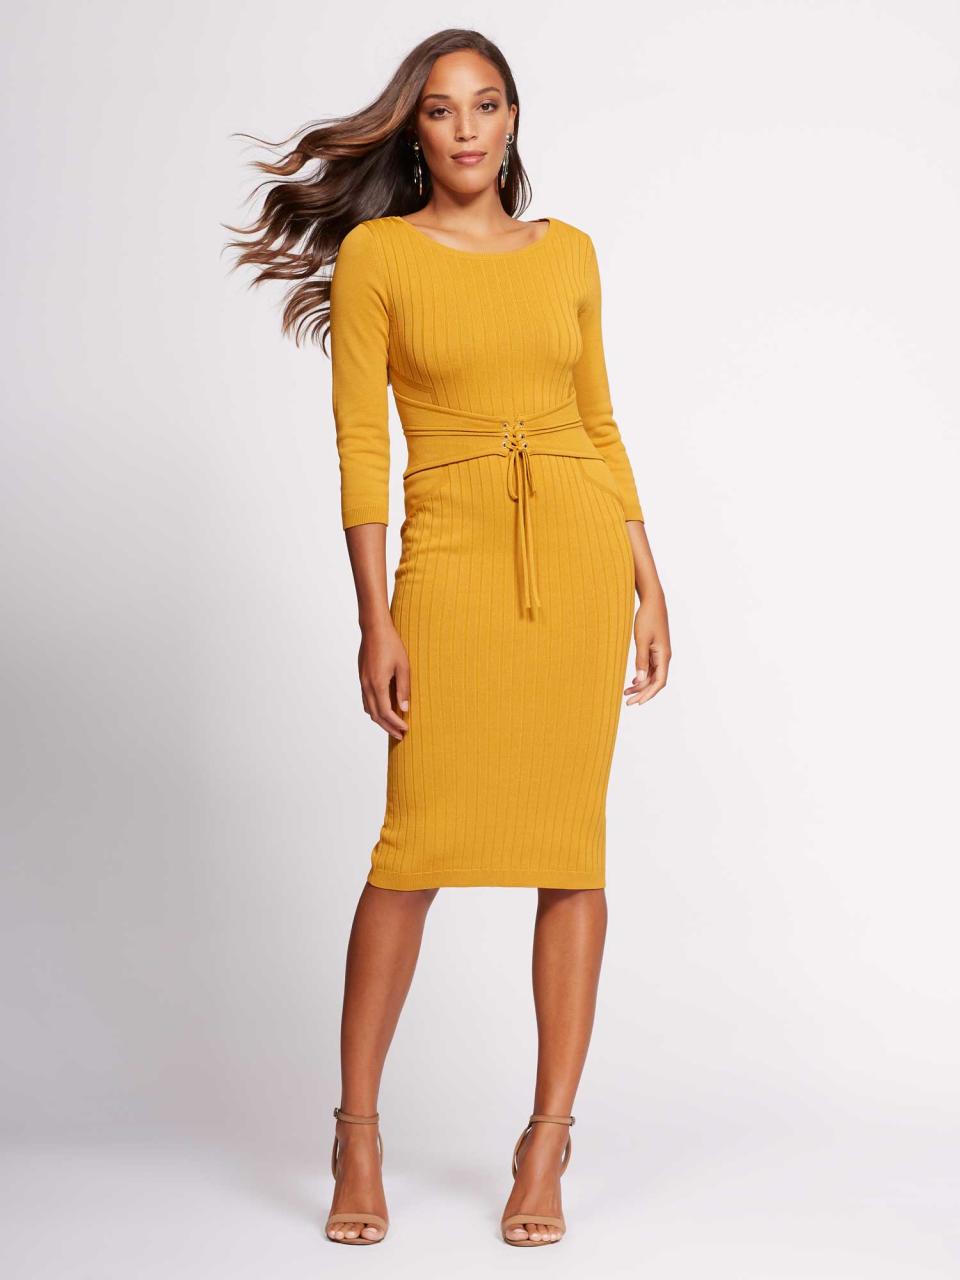 Mustard-yellow dress is perfect for the workplace. (Photo: Courtesy of New York & Company)